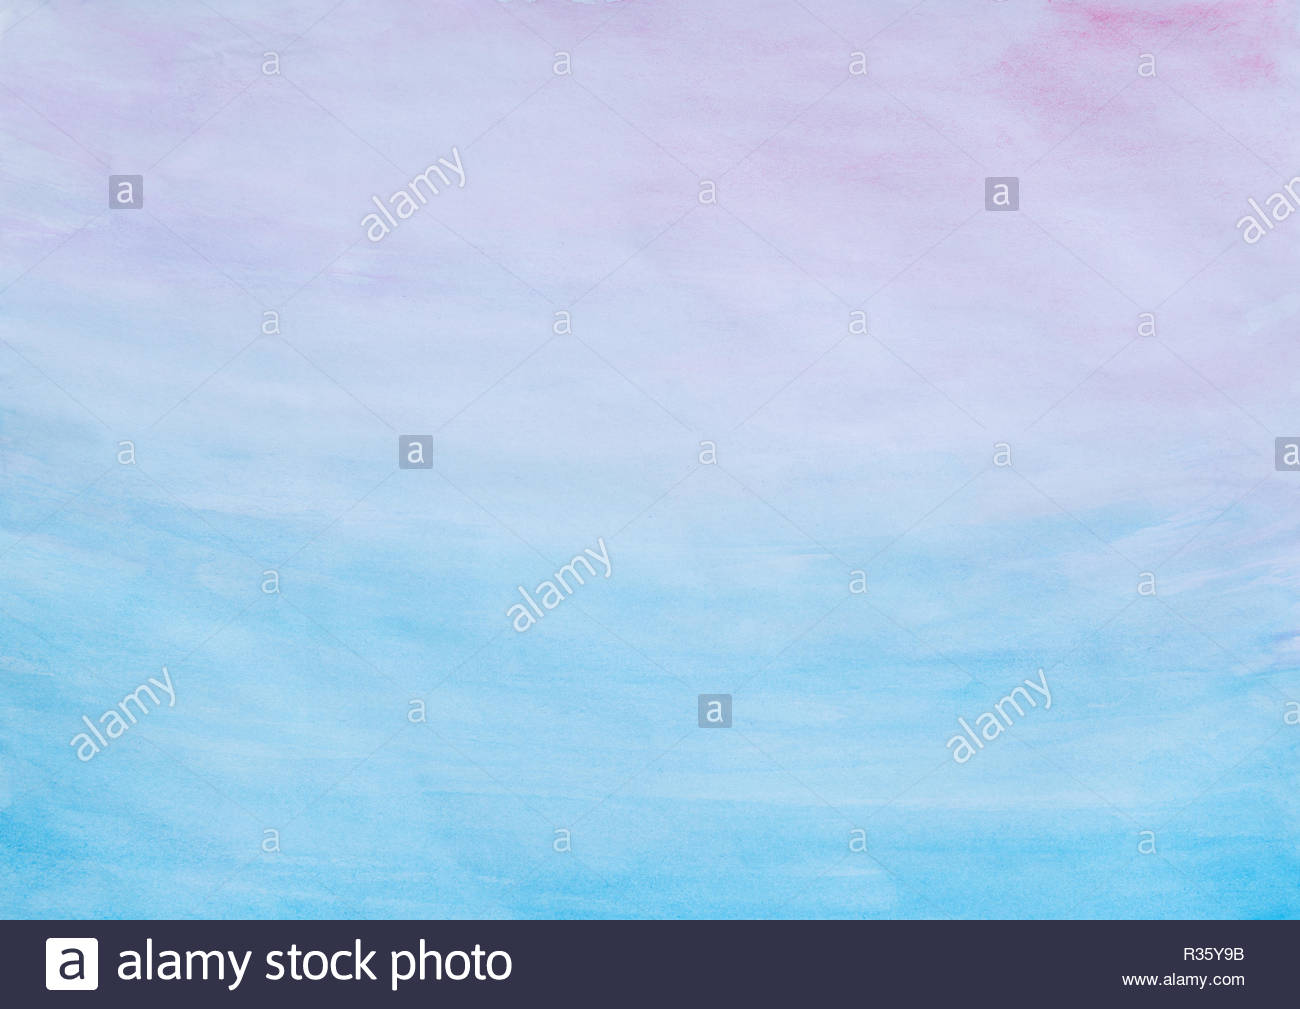 Abstract Pink And Blue Watercolor Gradient Fill Background With